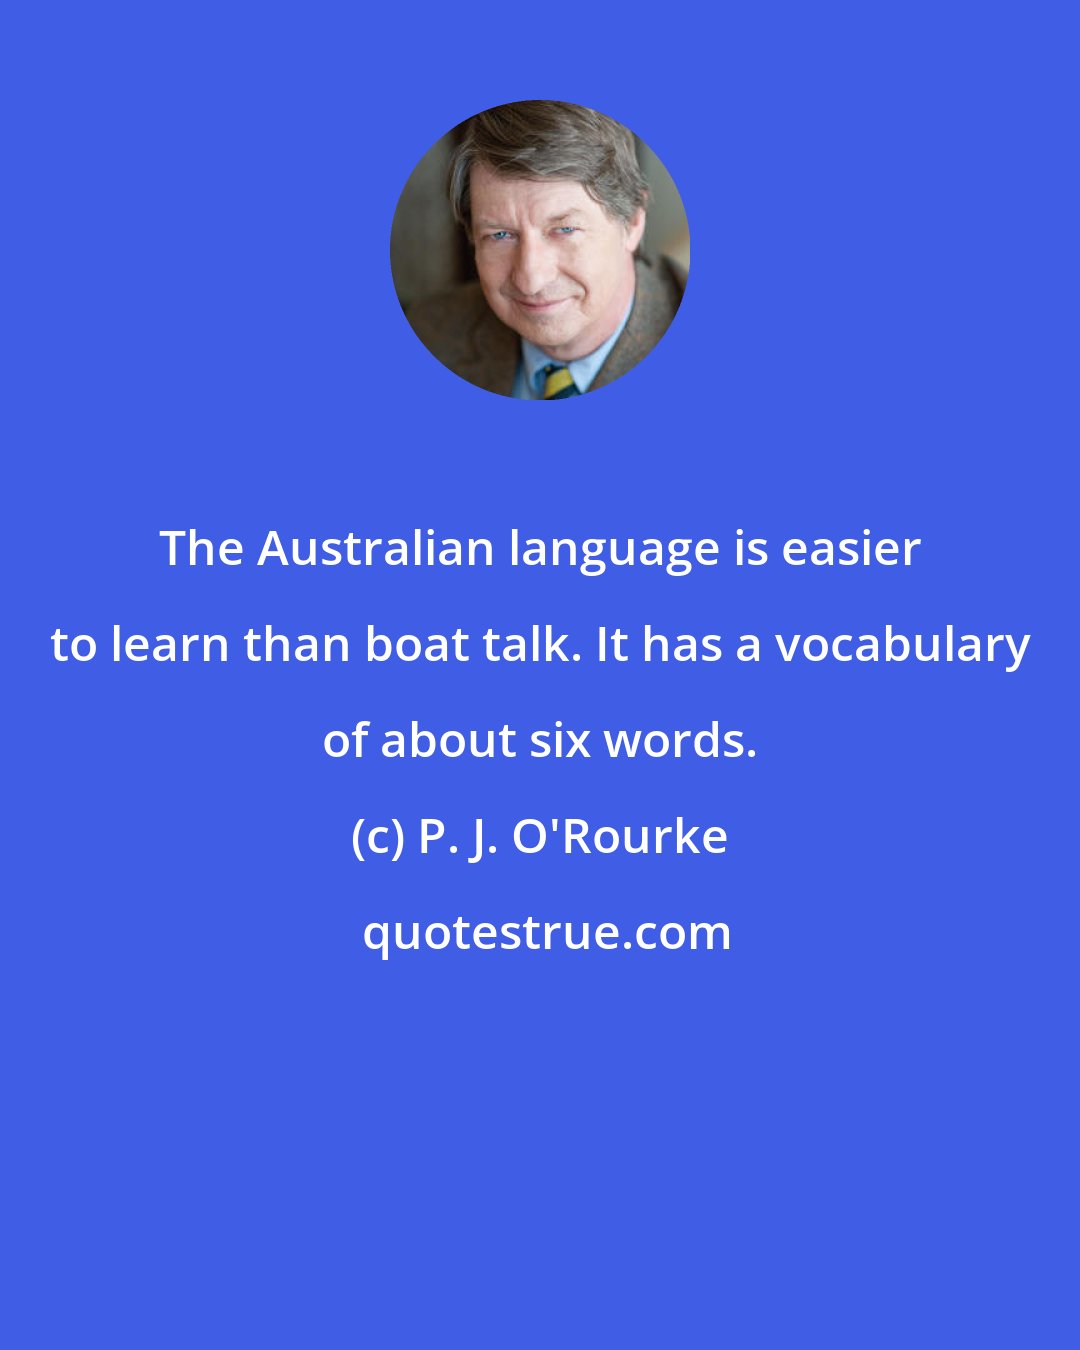 P. J. O'Rourke: The Australian language is easier to learn than boat talk. It has a vocabulary of about six words.